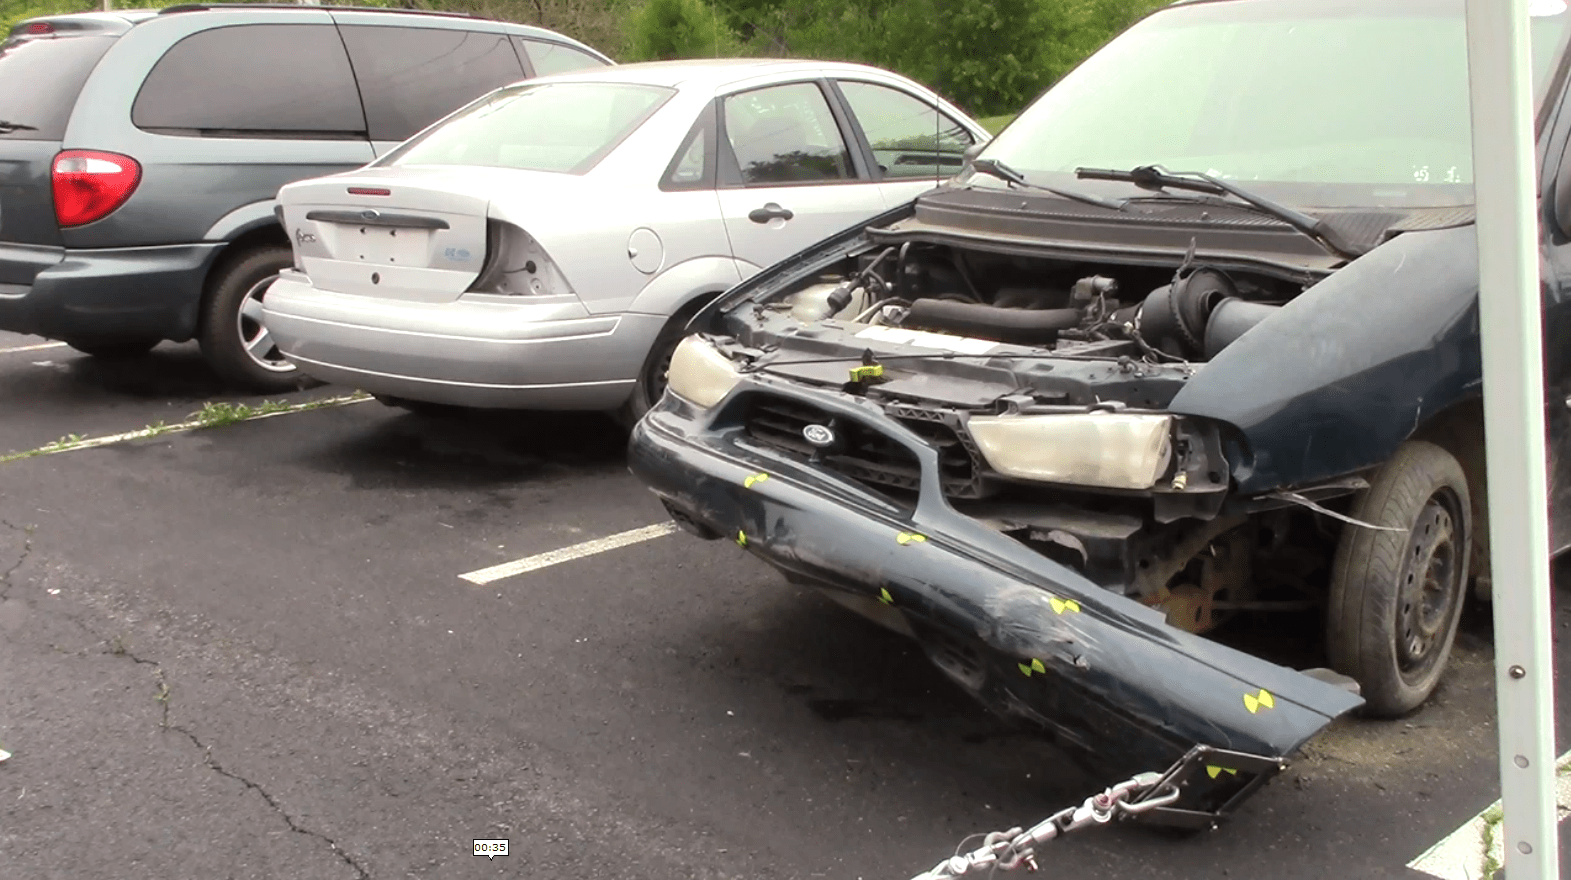 three damaged automobiles in a parking lot